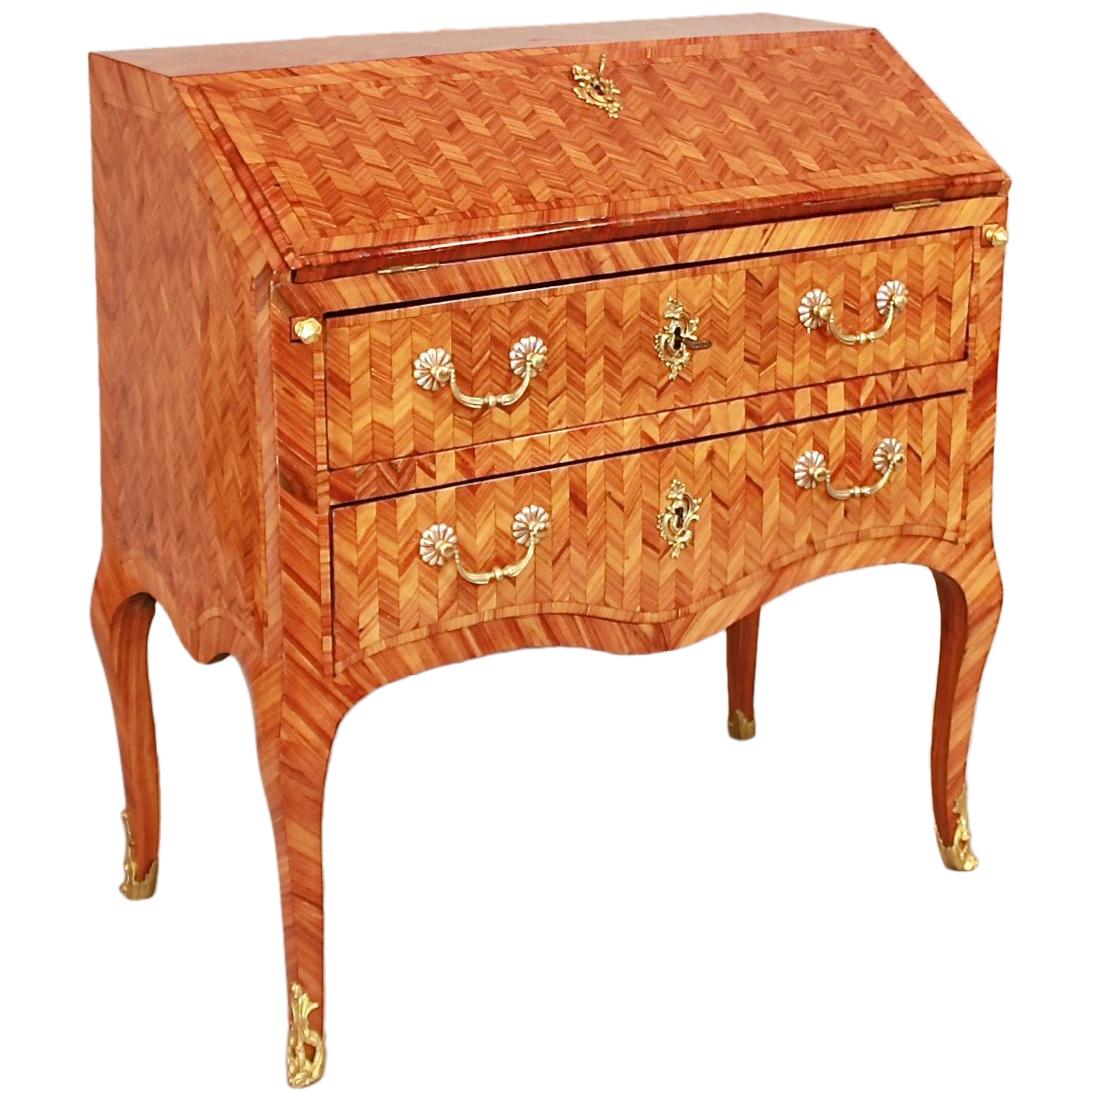 18th Century French Louis XV Herringbone Parquetry Commode à Secrétaire or Desk 